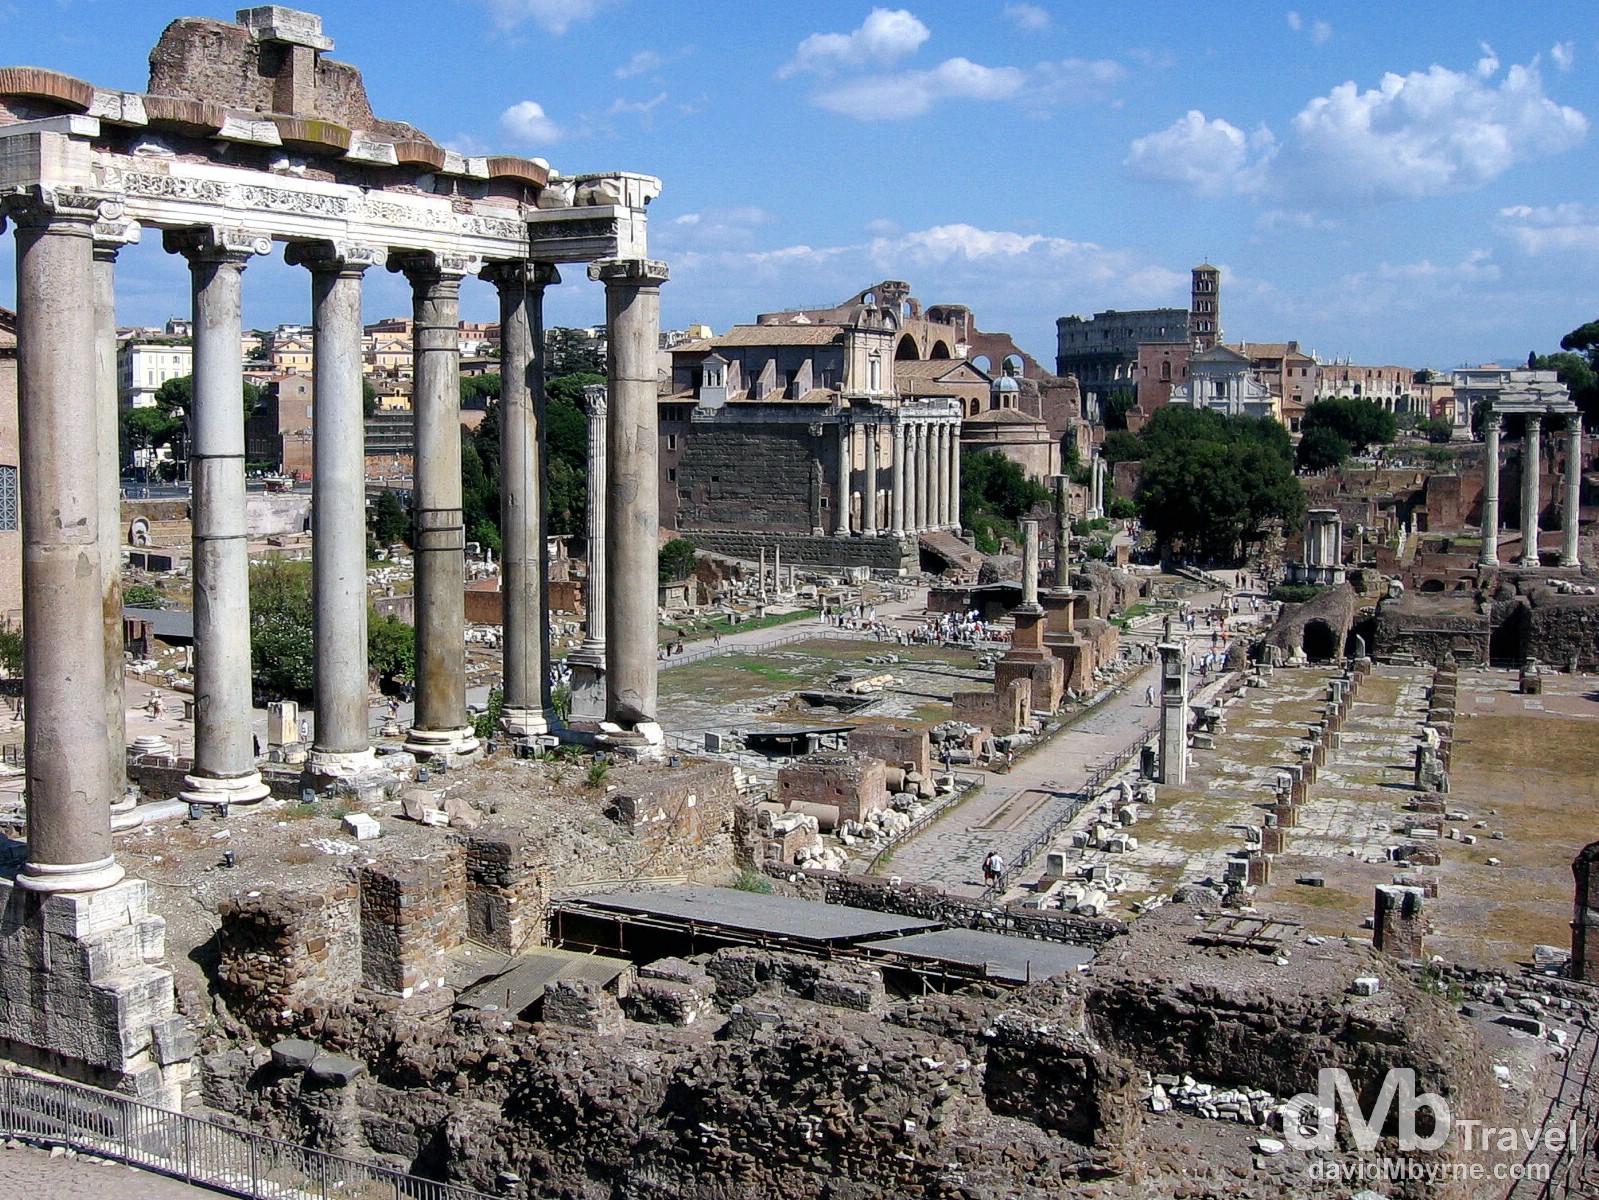 The ancient Roman Forum in Rome, Italy. September 2nd, 2007.